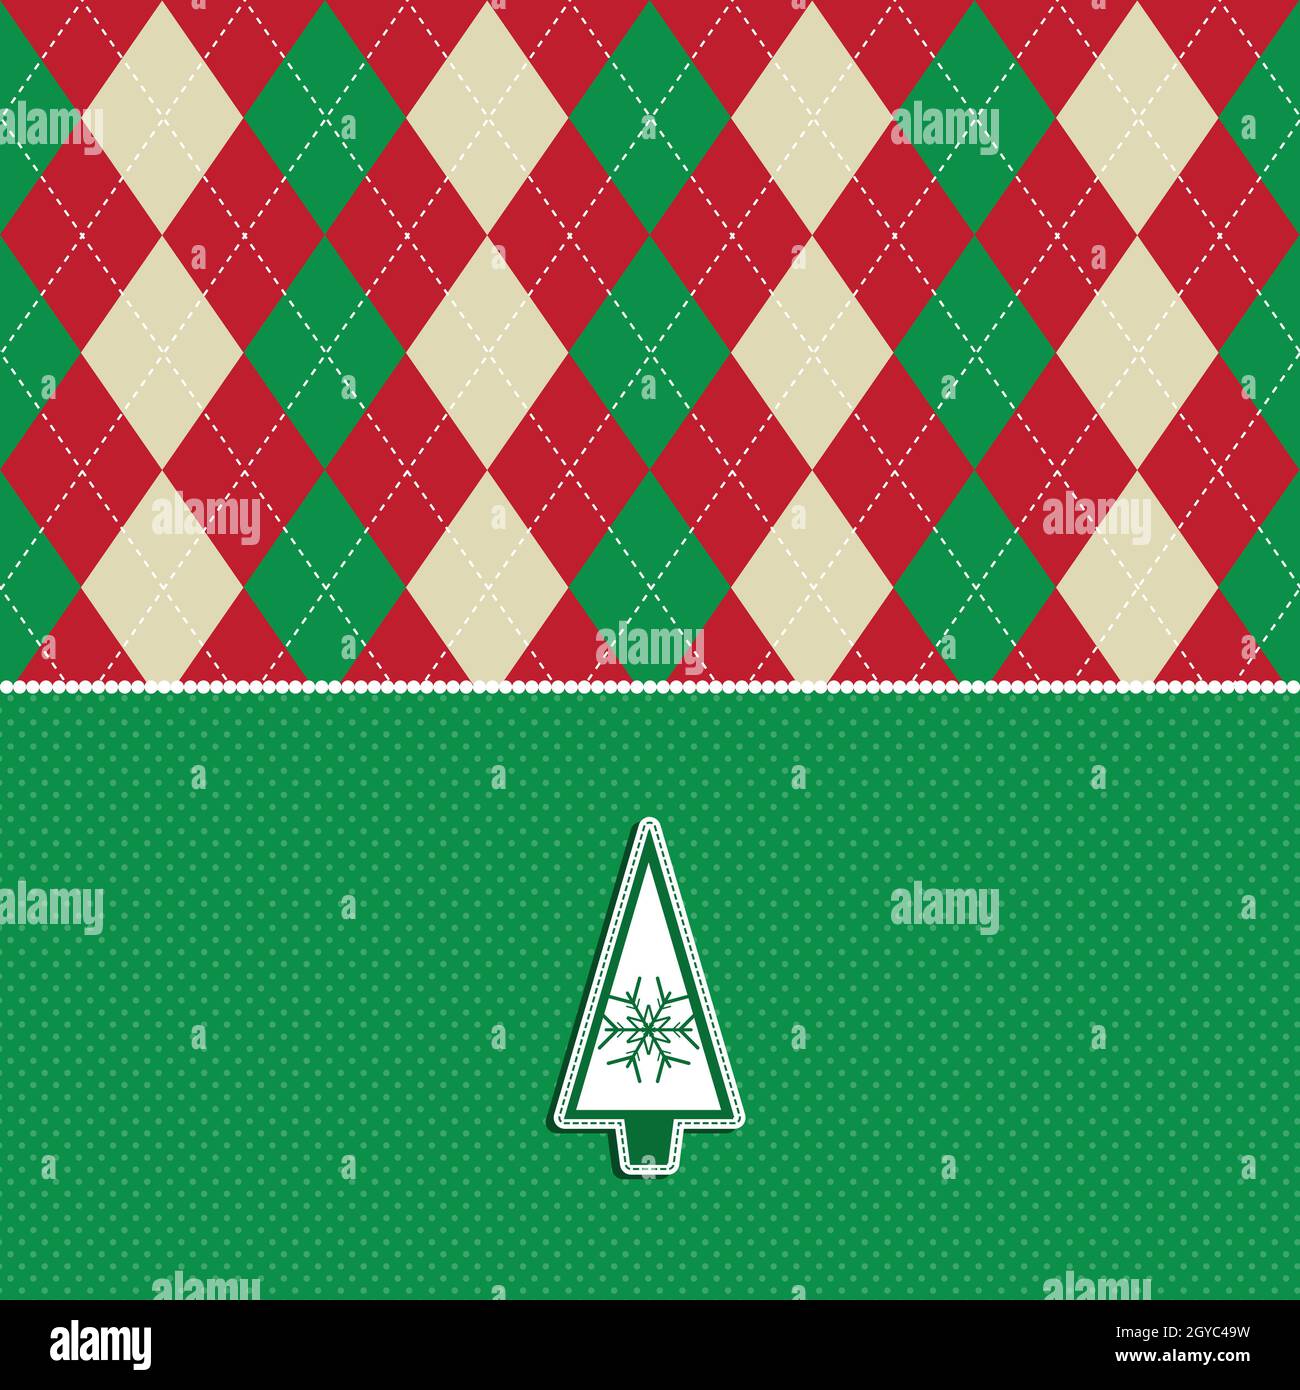 Christmas background with an argyle pattern and tree design Stock Photo